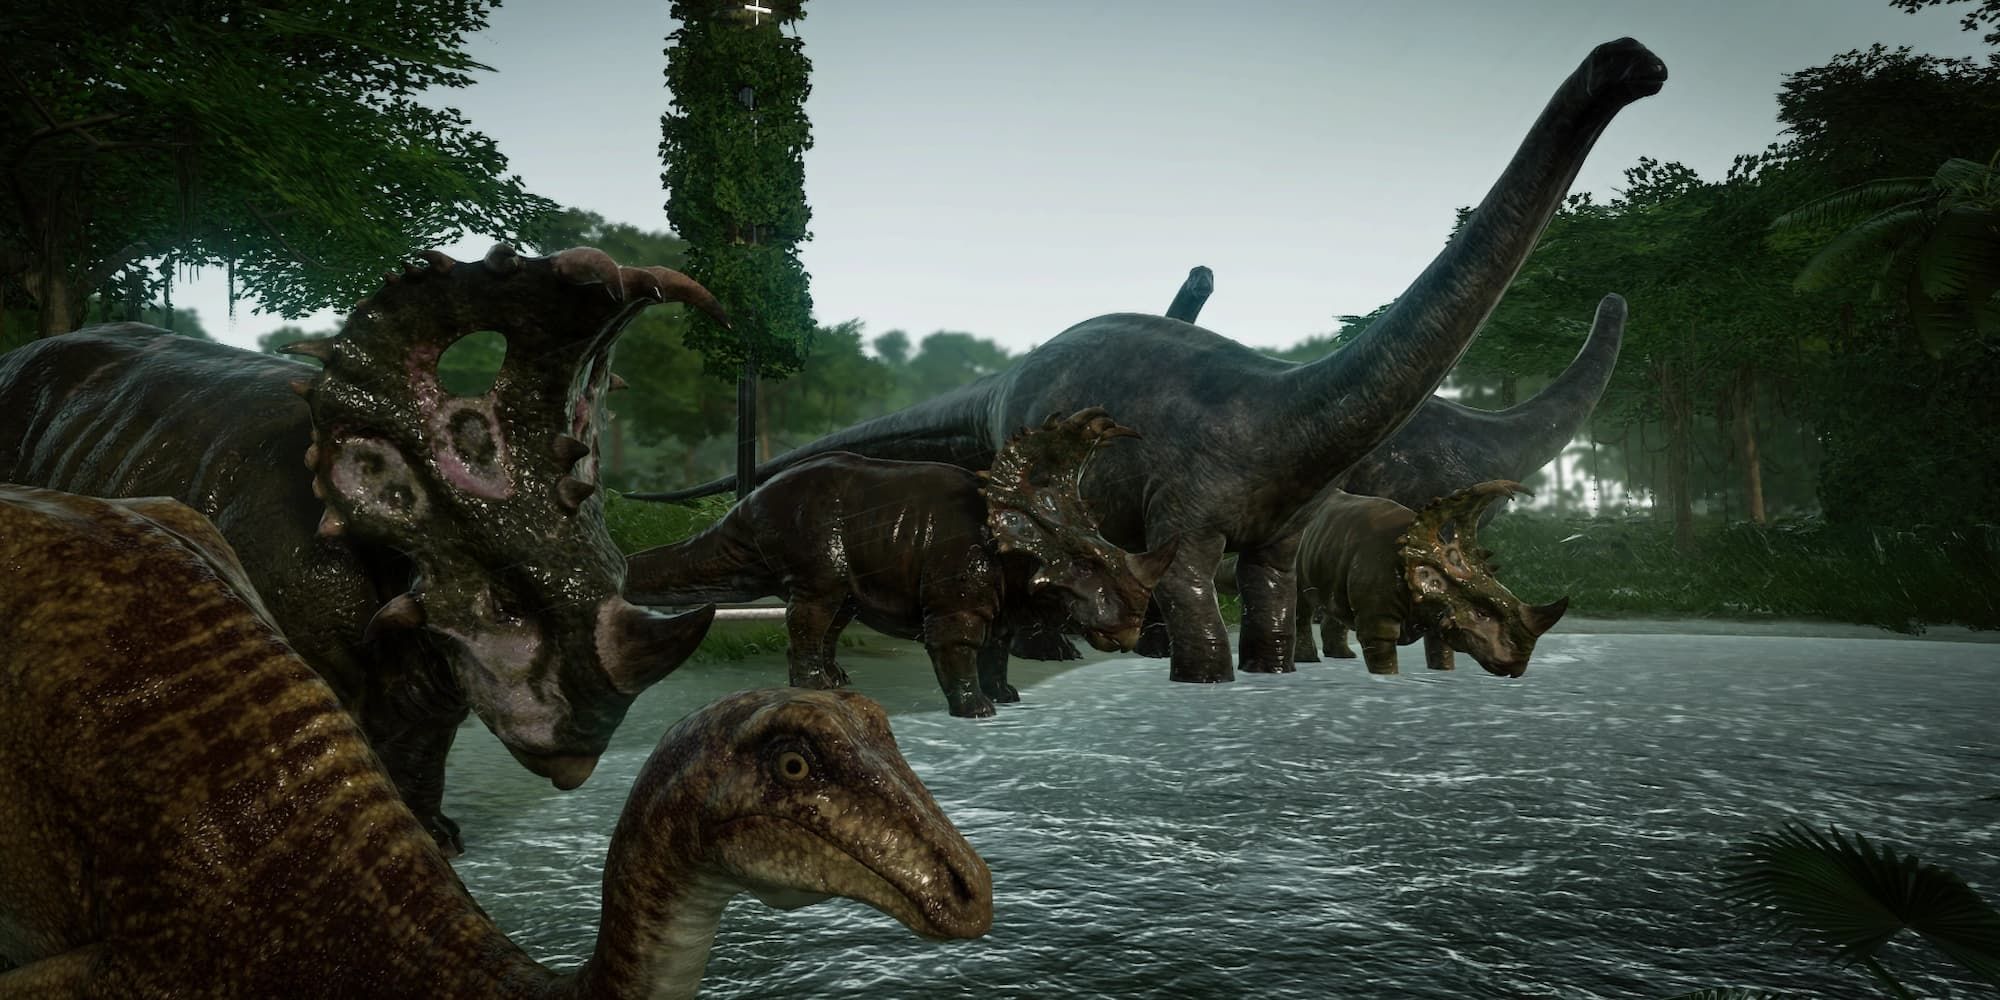 Several dinosaurs cross a body of water in Jurassic World Evolution.